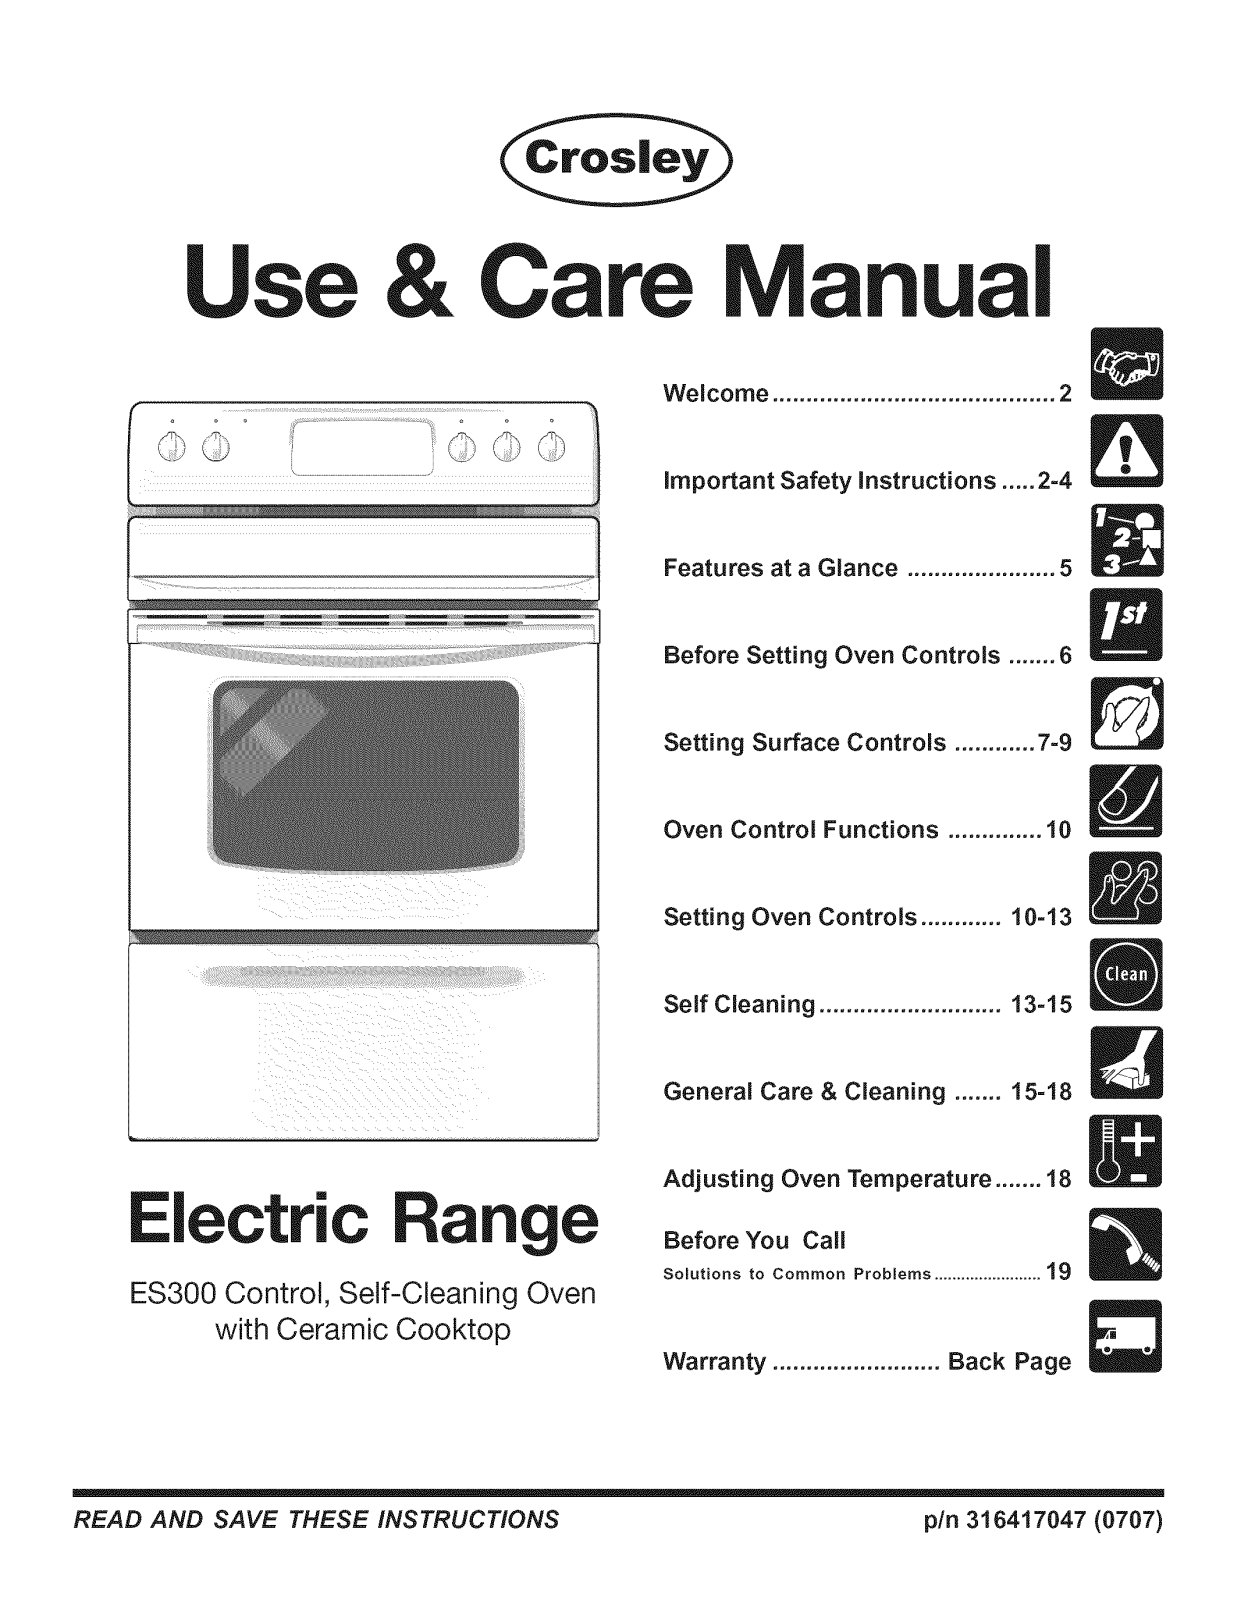 Crosley CRE3880GQQD, CRE3880HSSF, CRE3880HSSE, CRE3880HSSB, CRE3880GWWD Owner’s Manual